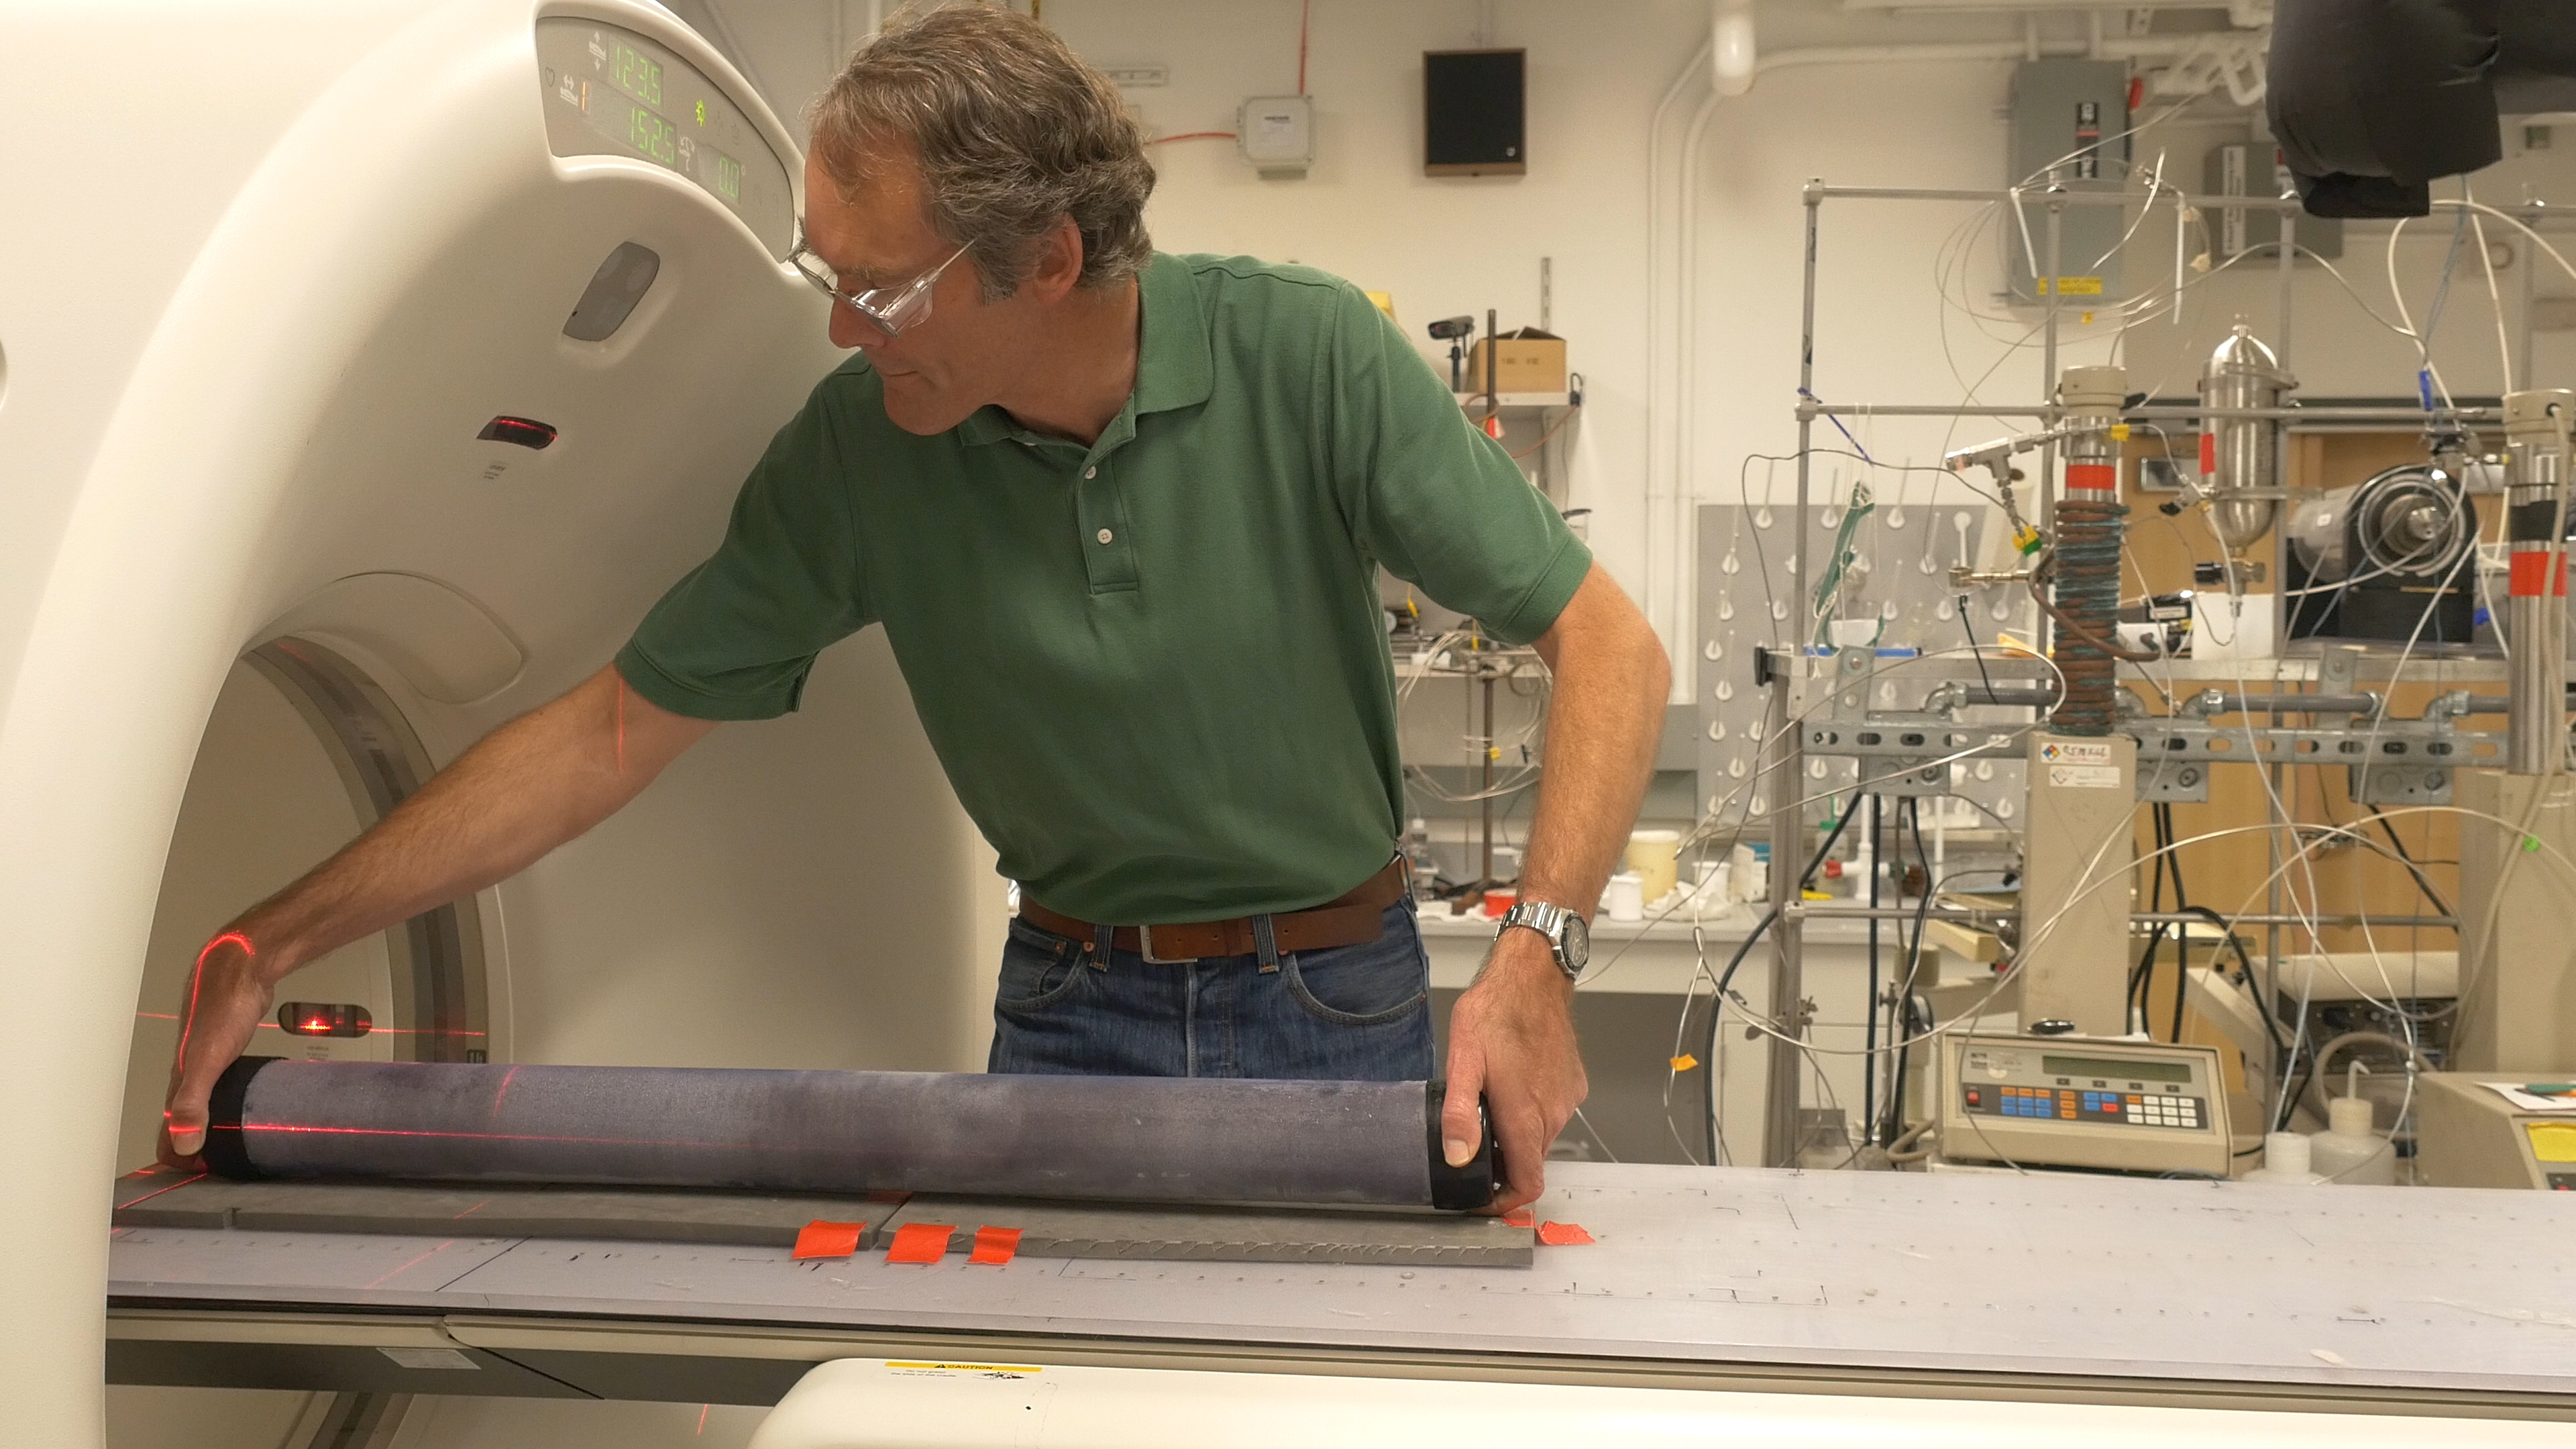 Tim Kneafsey loading a permafrost core onto a CT scanner at LBNL. Photo: Josh Cassidy/KQED